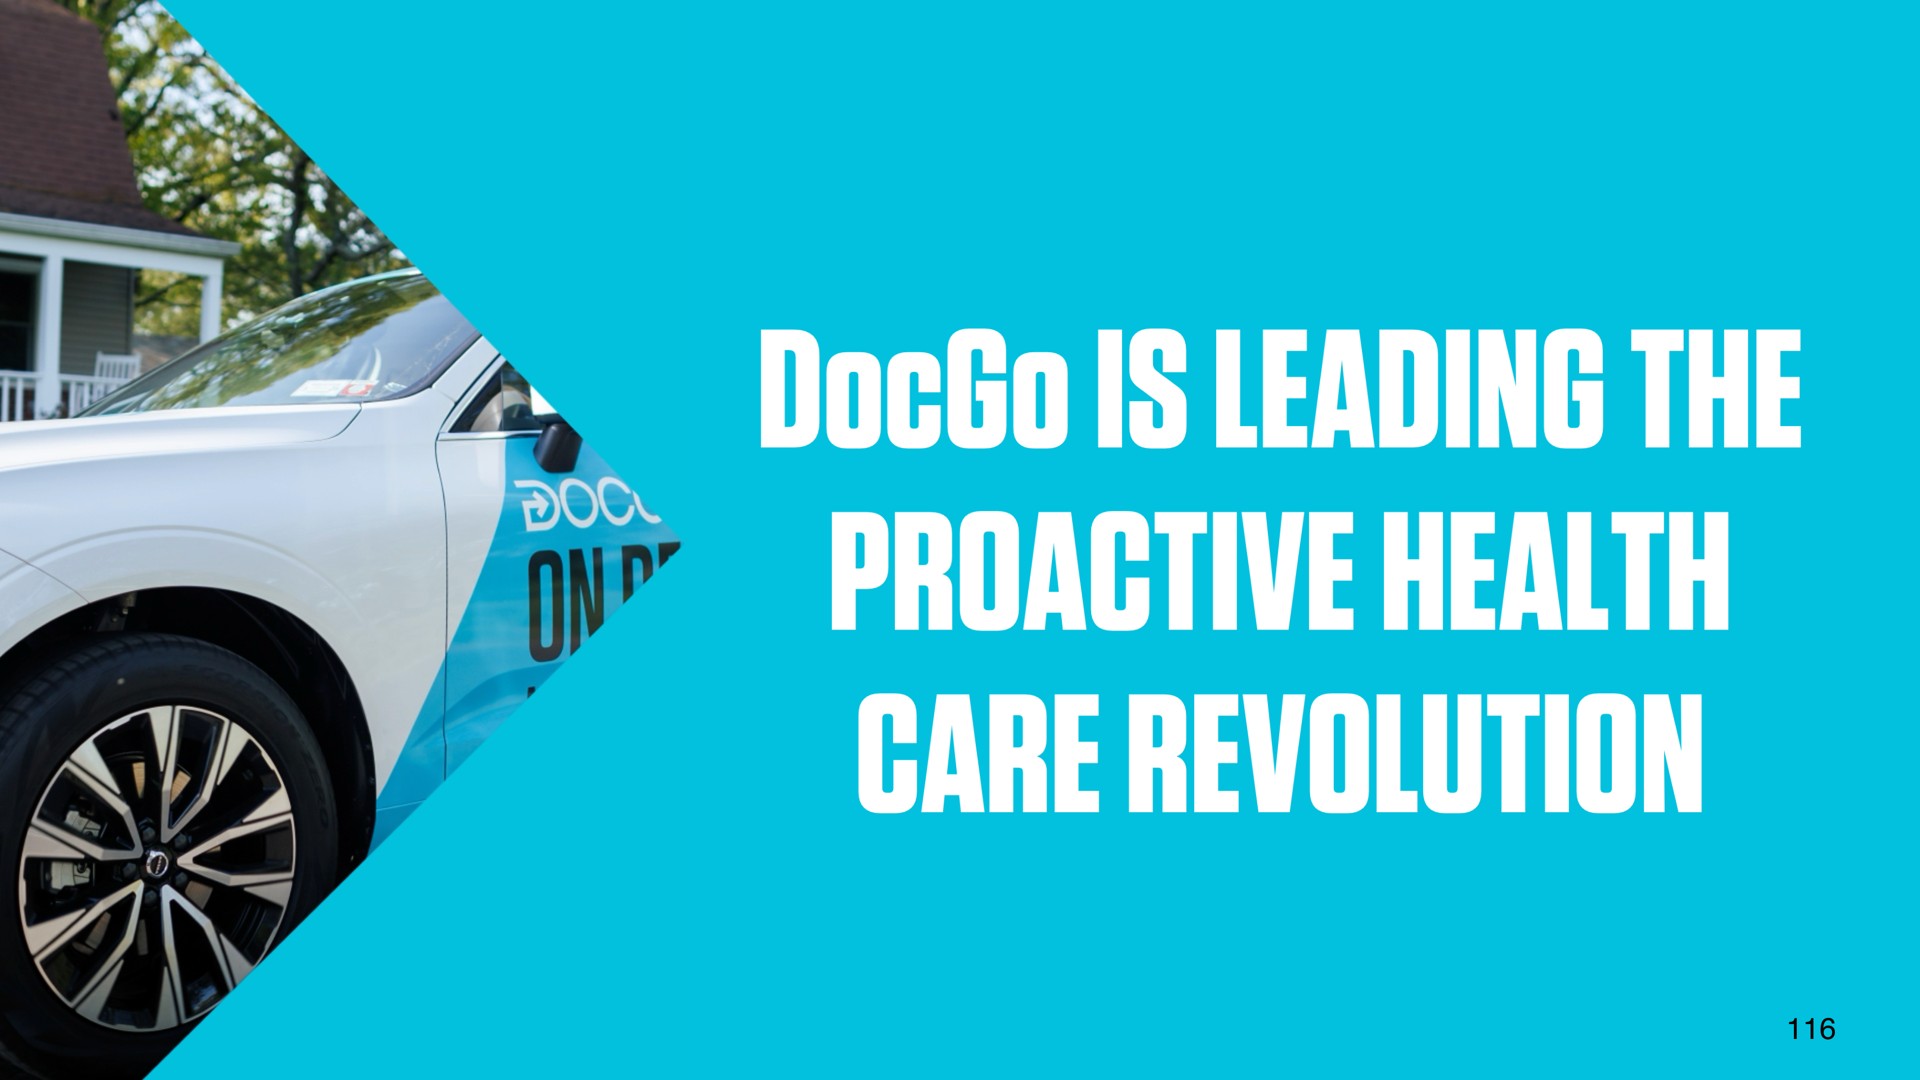 we keep you out of the hospital care revolution | DocGo